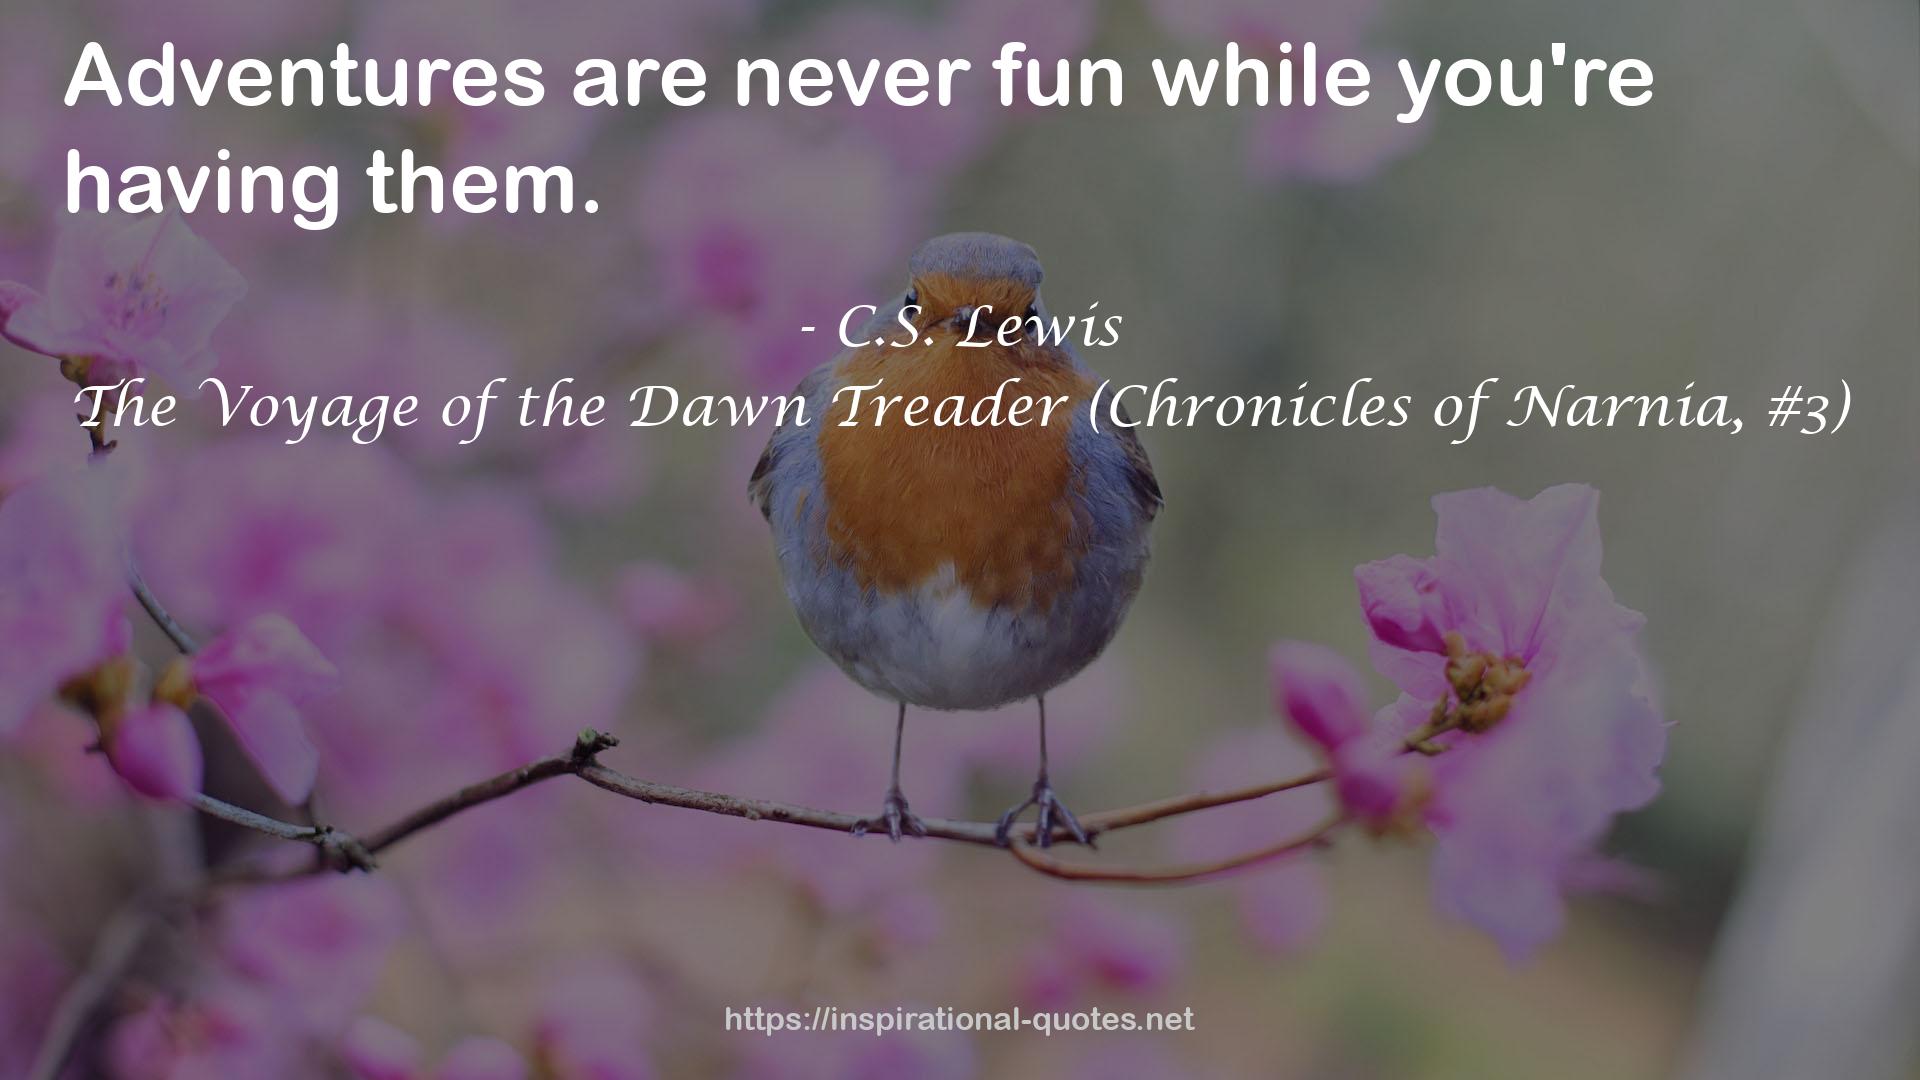 The Voyage of the Dawn Treader (Chronicles of Narnia, #3) QUOTES